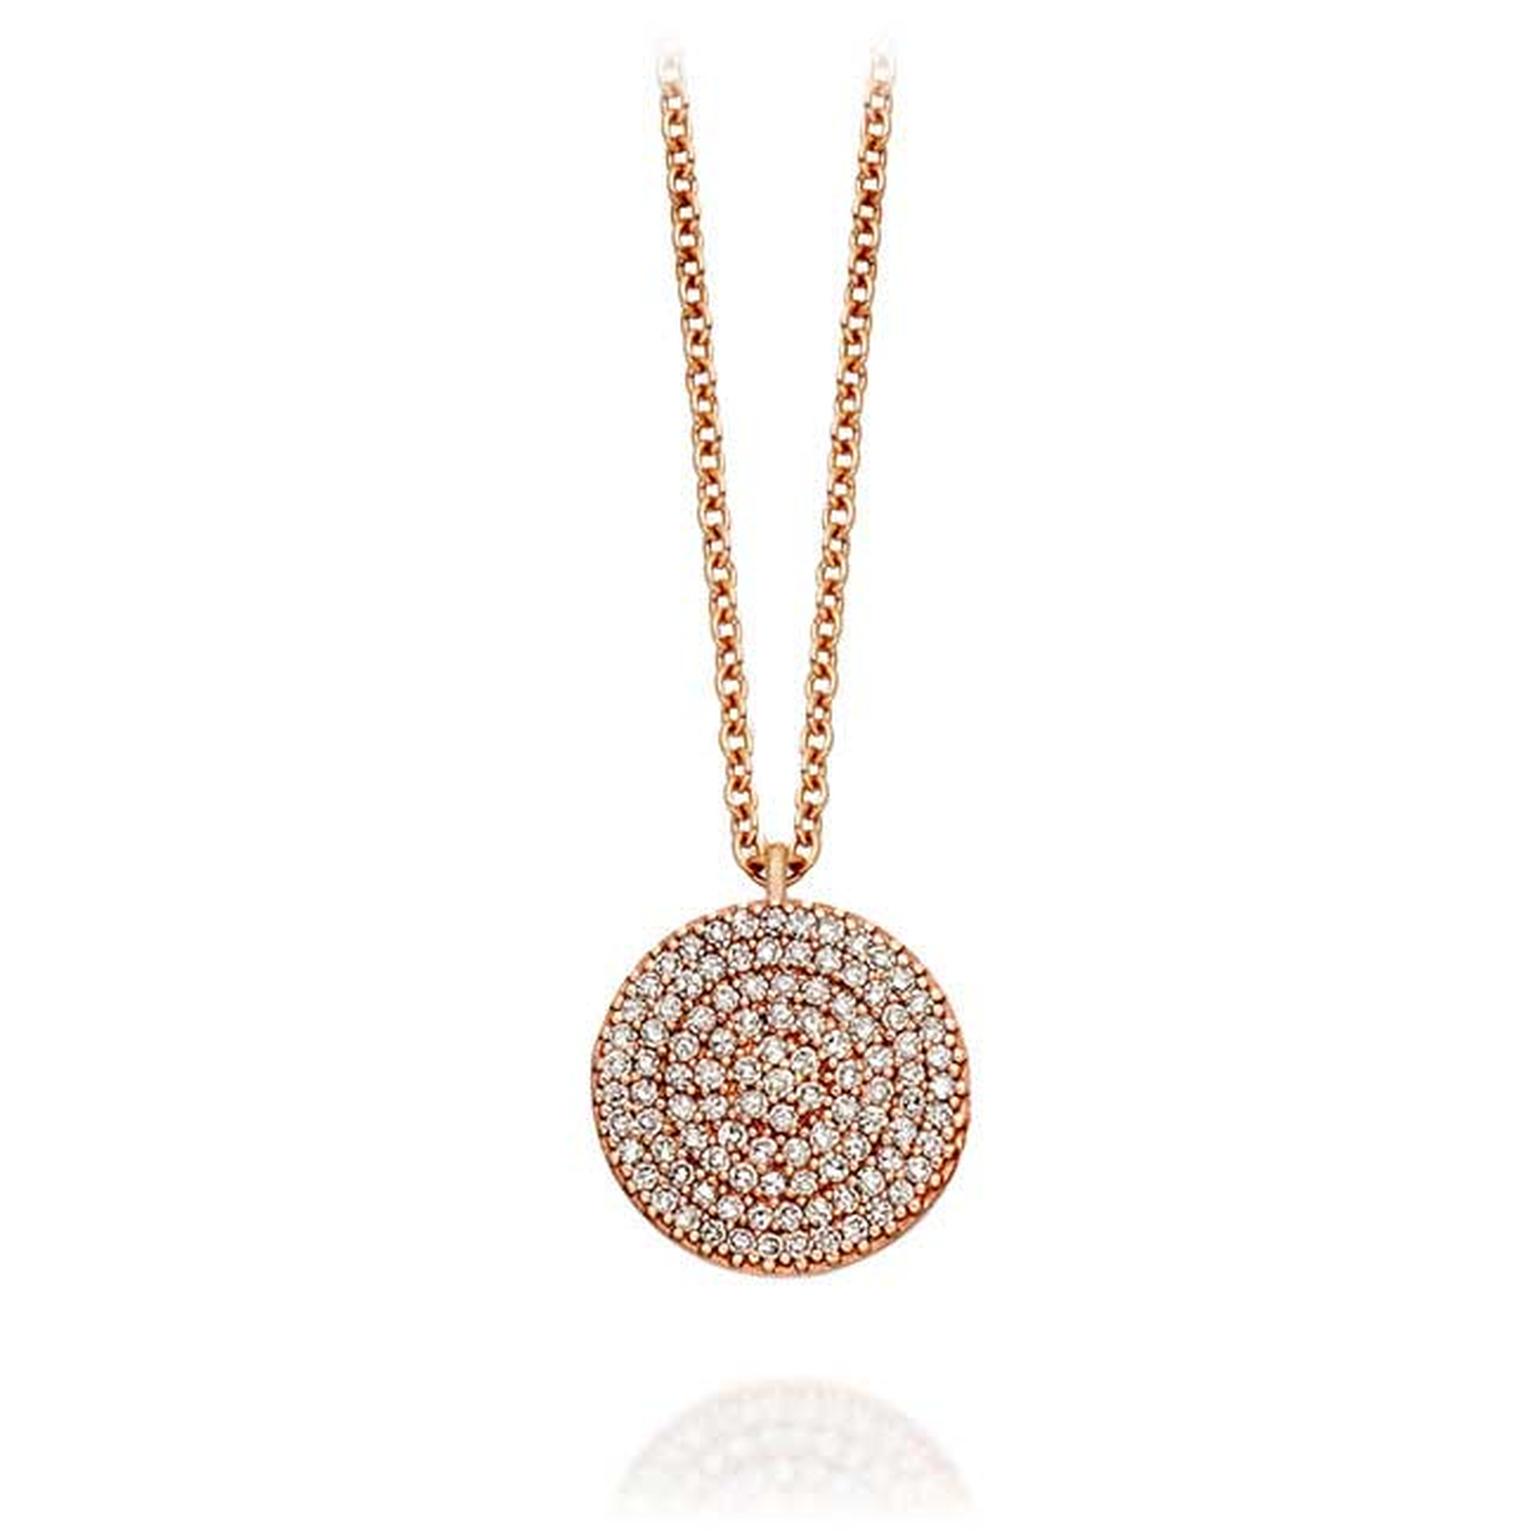 Astley Clarke Muse Icon diamond and rose gold necklace (£1,150).